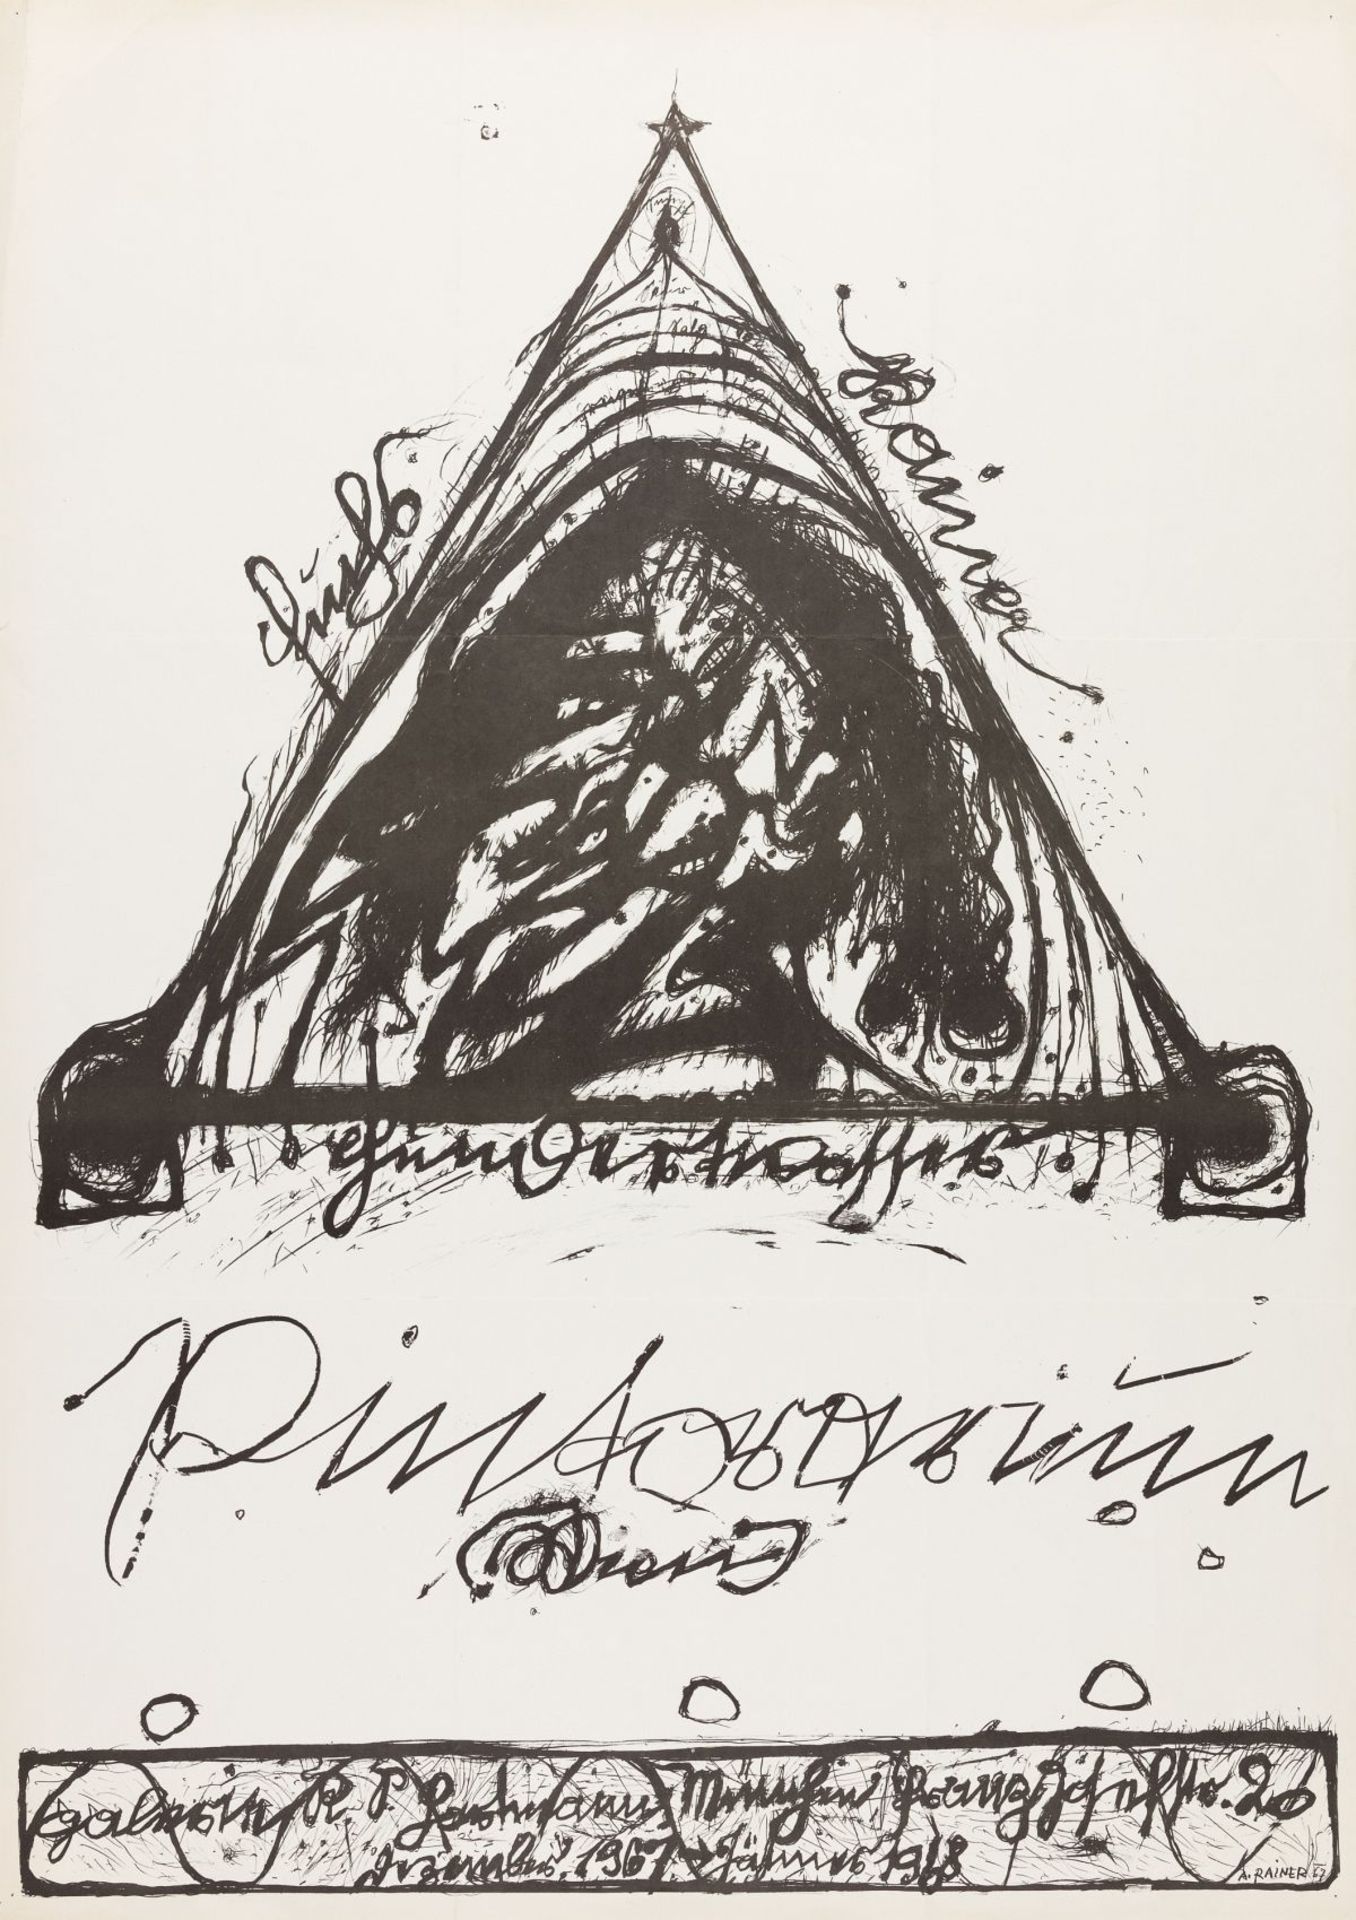 Rainer, Arnulf(*1929)Pintorarium, 1967lithographsigned and dated in the plate lower right34,3 x 24,4